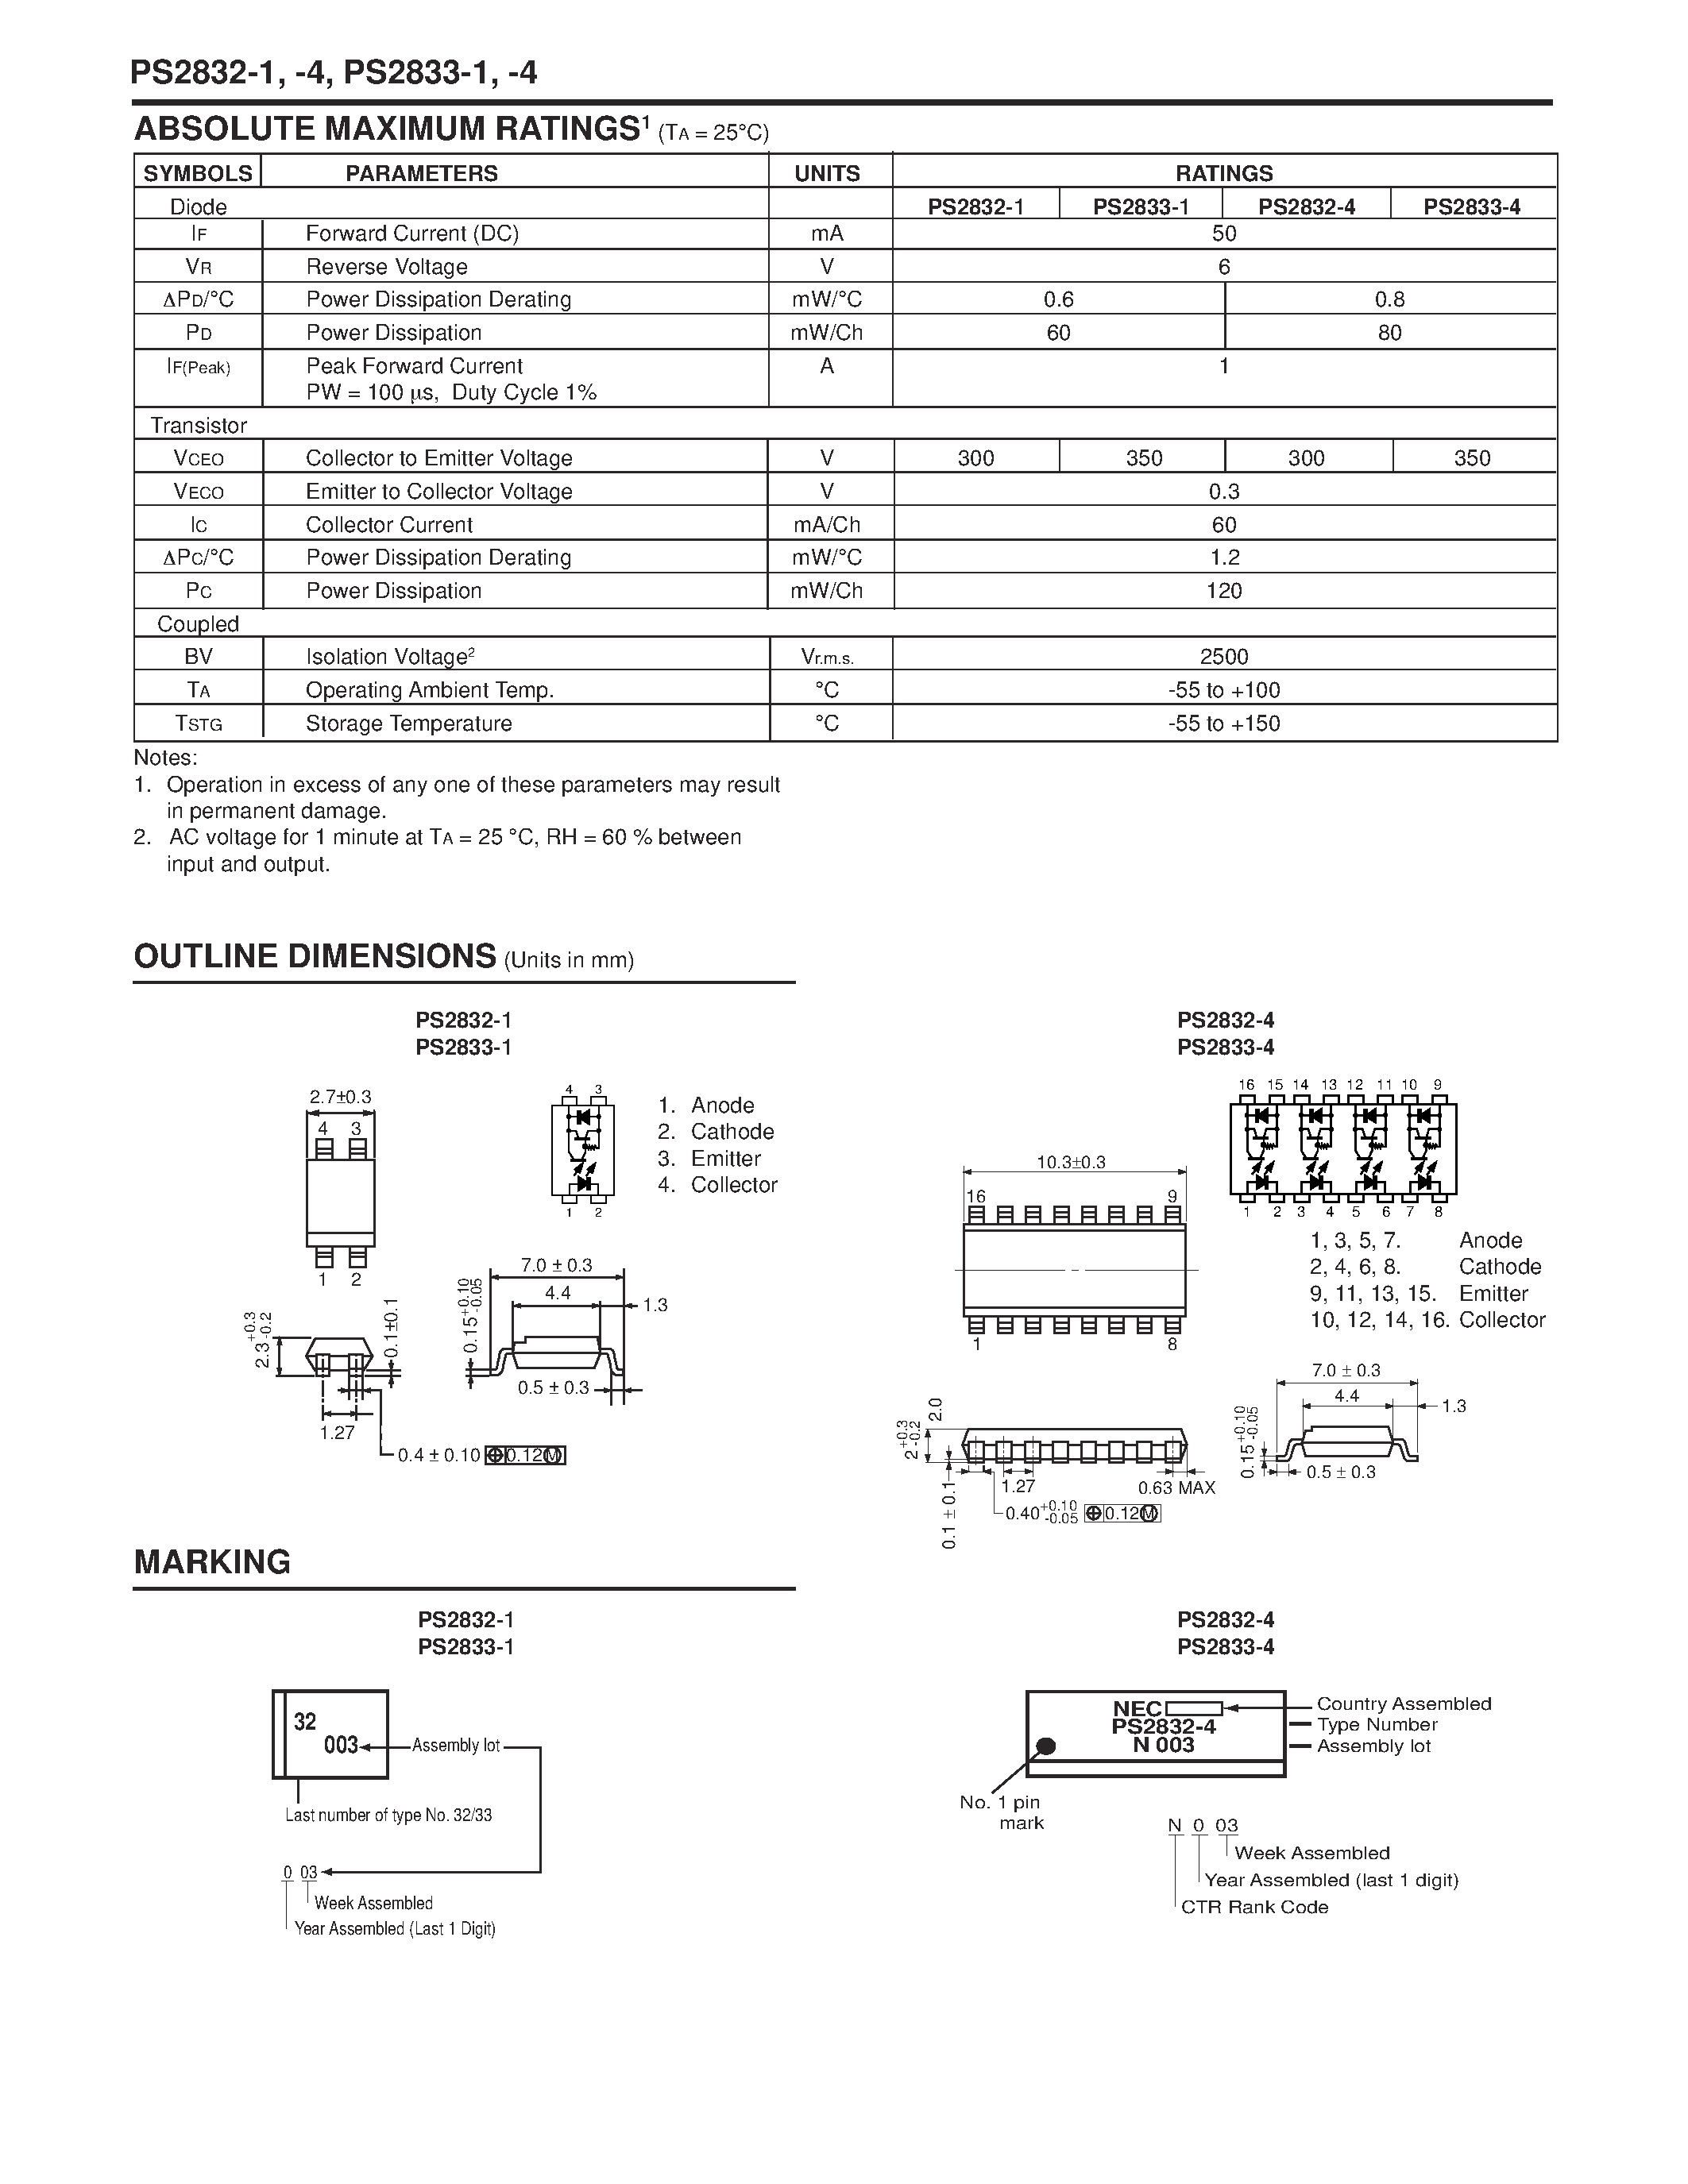 Datasheet PS2833-1-V-F4 - HIGH ISOLATION VOLTAGE HIGH COLLECTOR TO EMITTER VOLTAGE SOP MULTI OPTOCOUPLER page 2